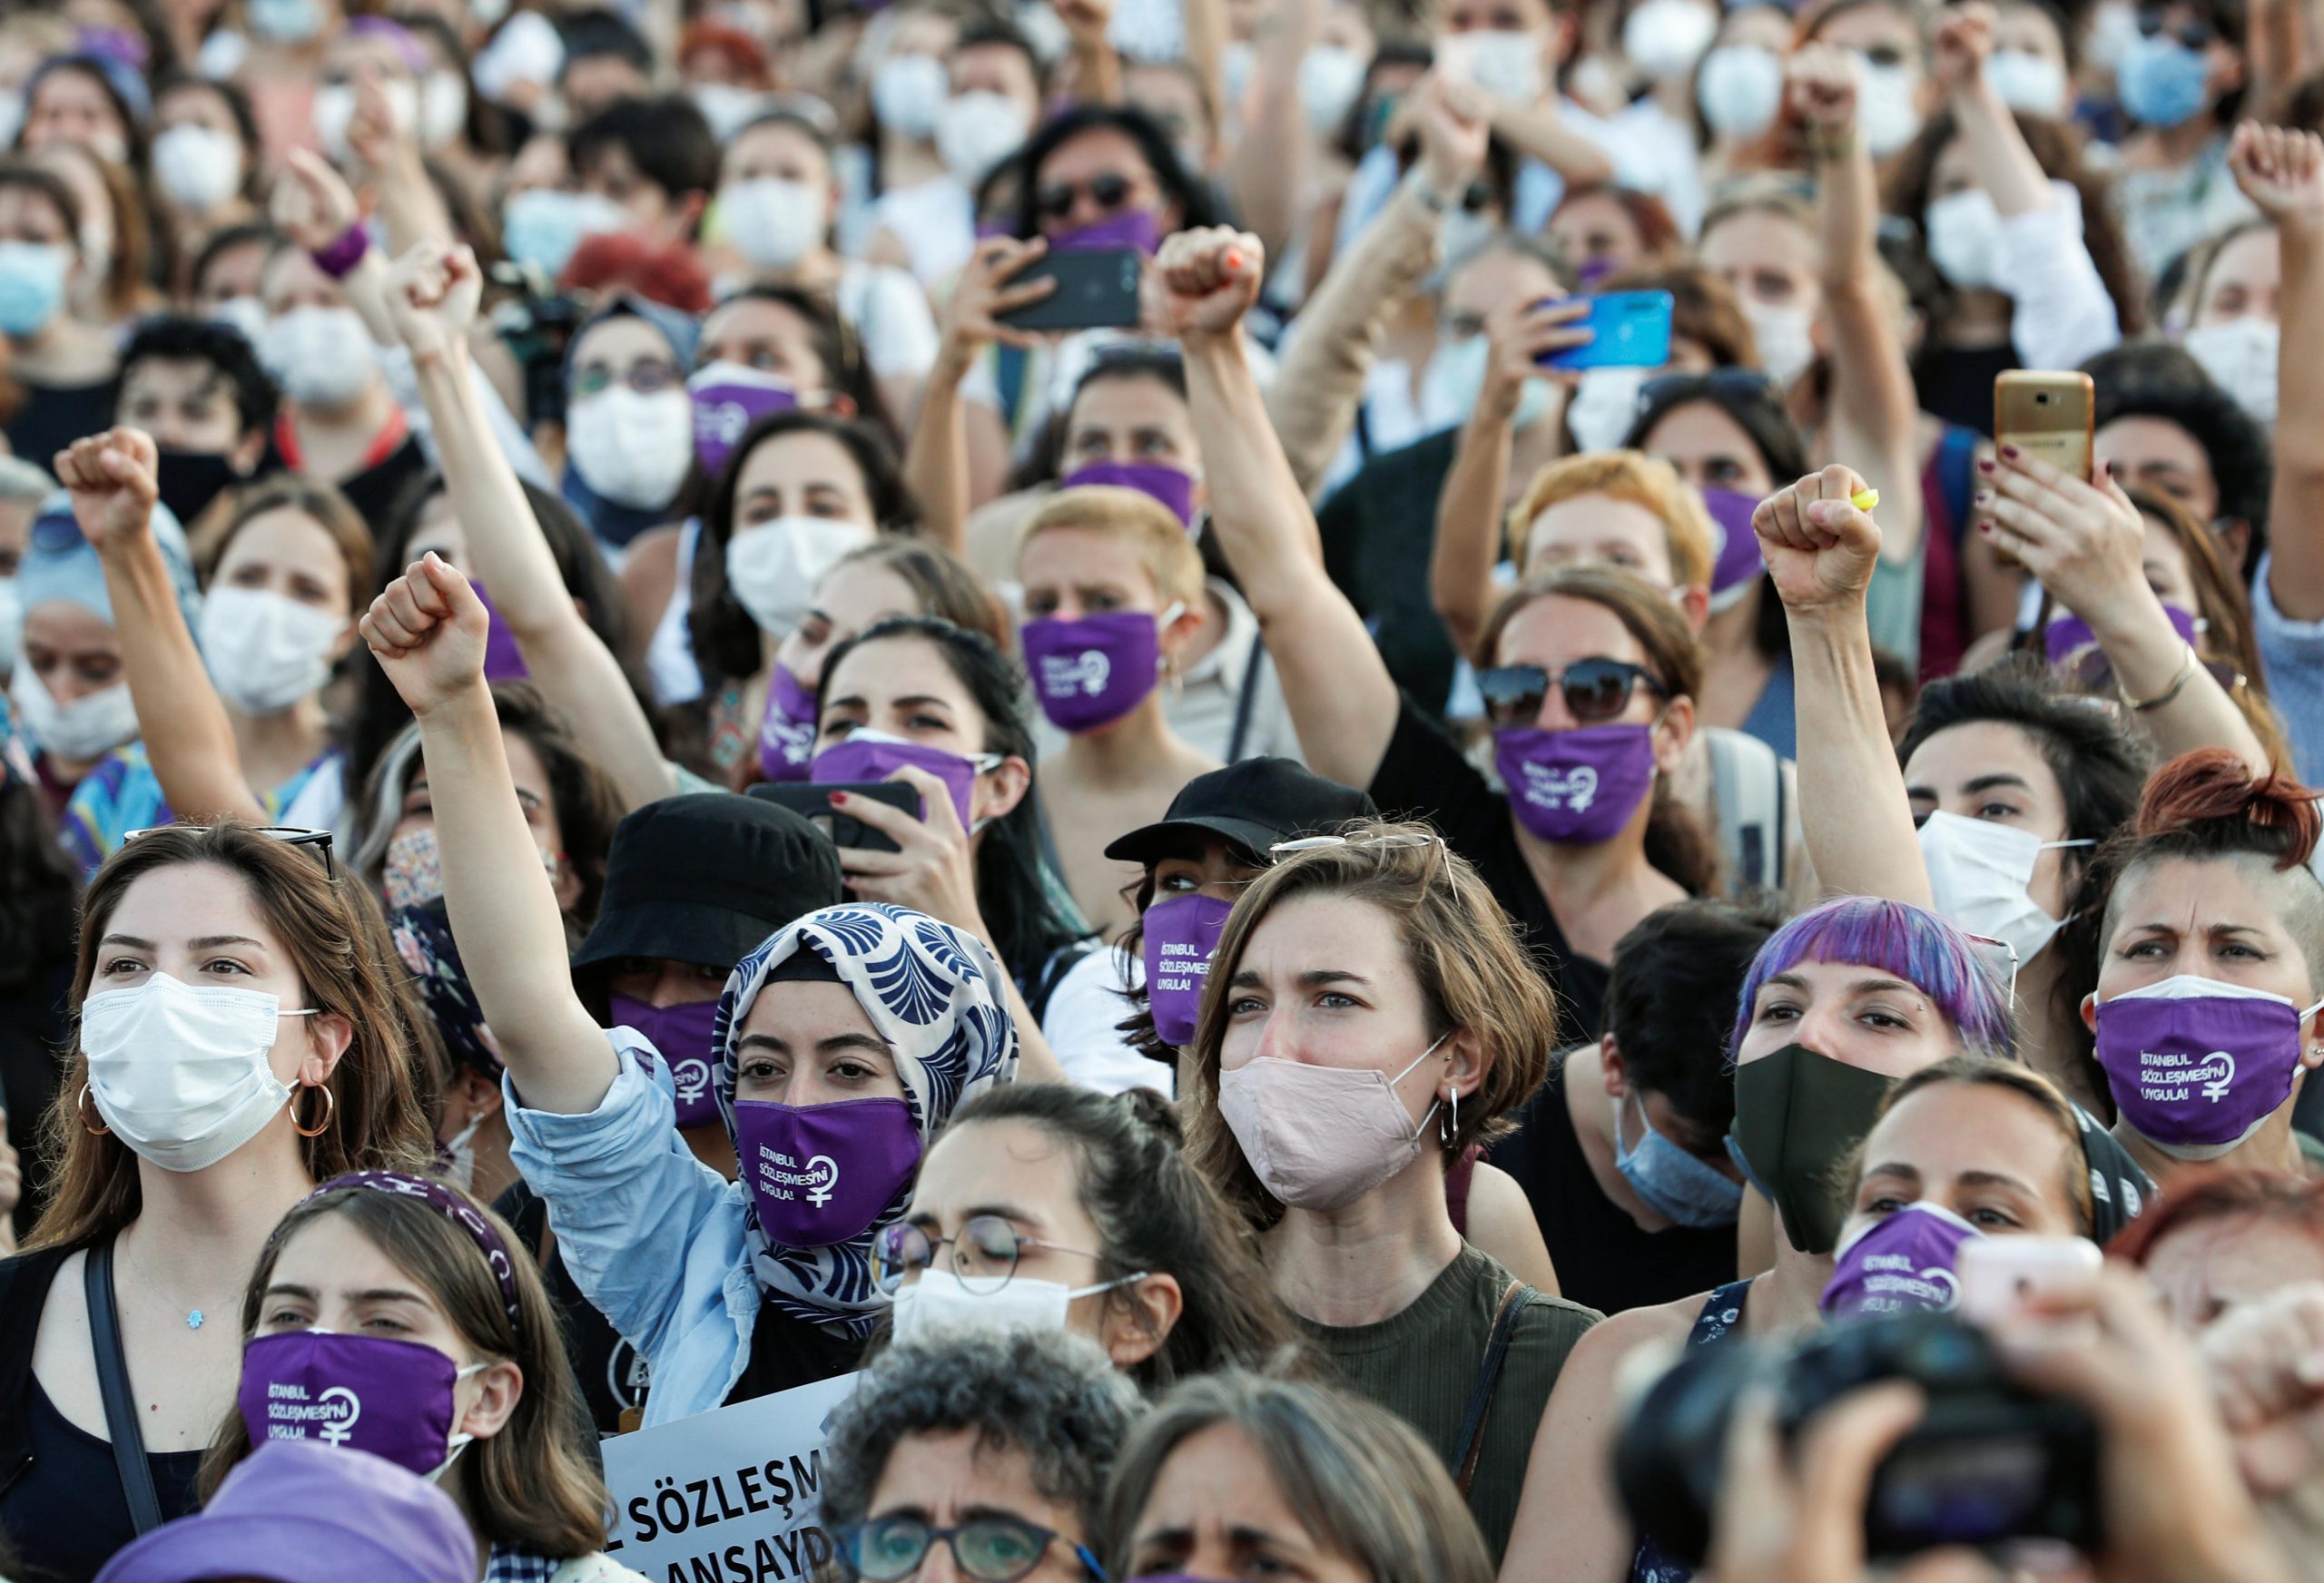 Femicide in Turkey is increasing, but protections for women are under threat